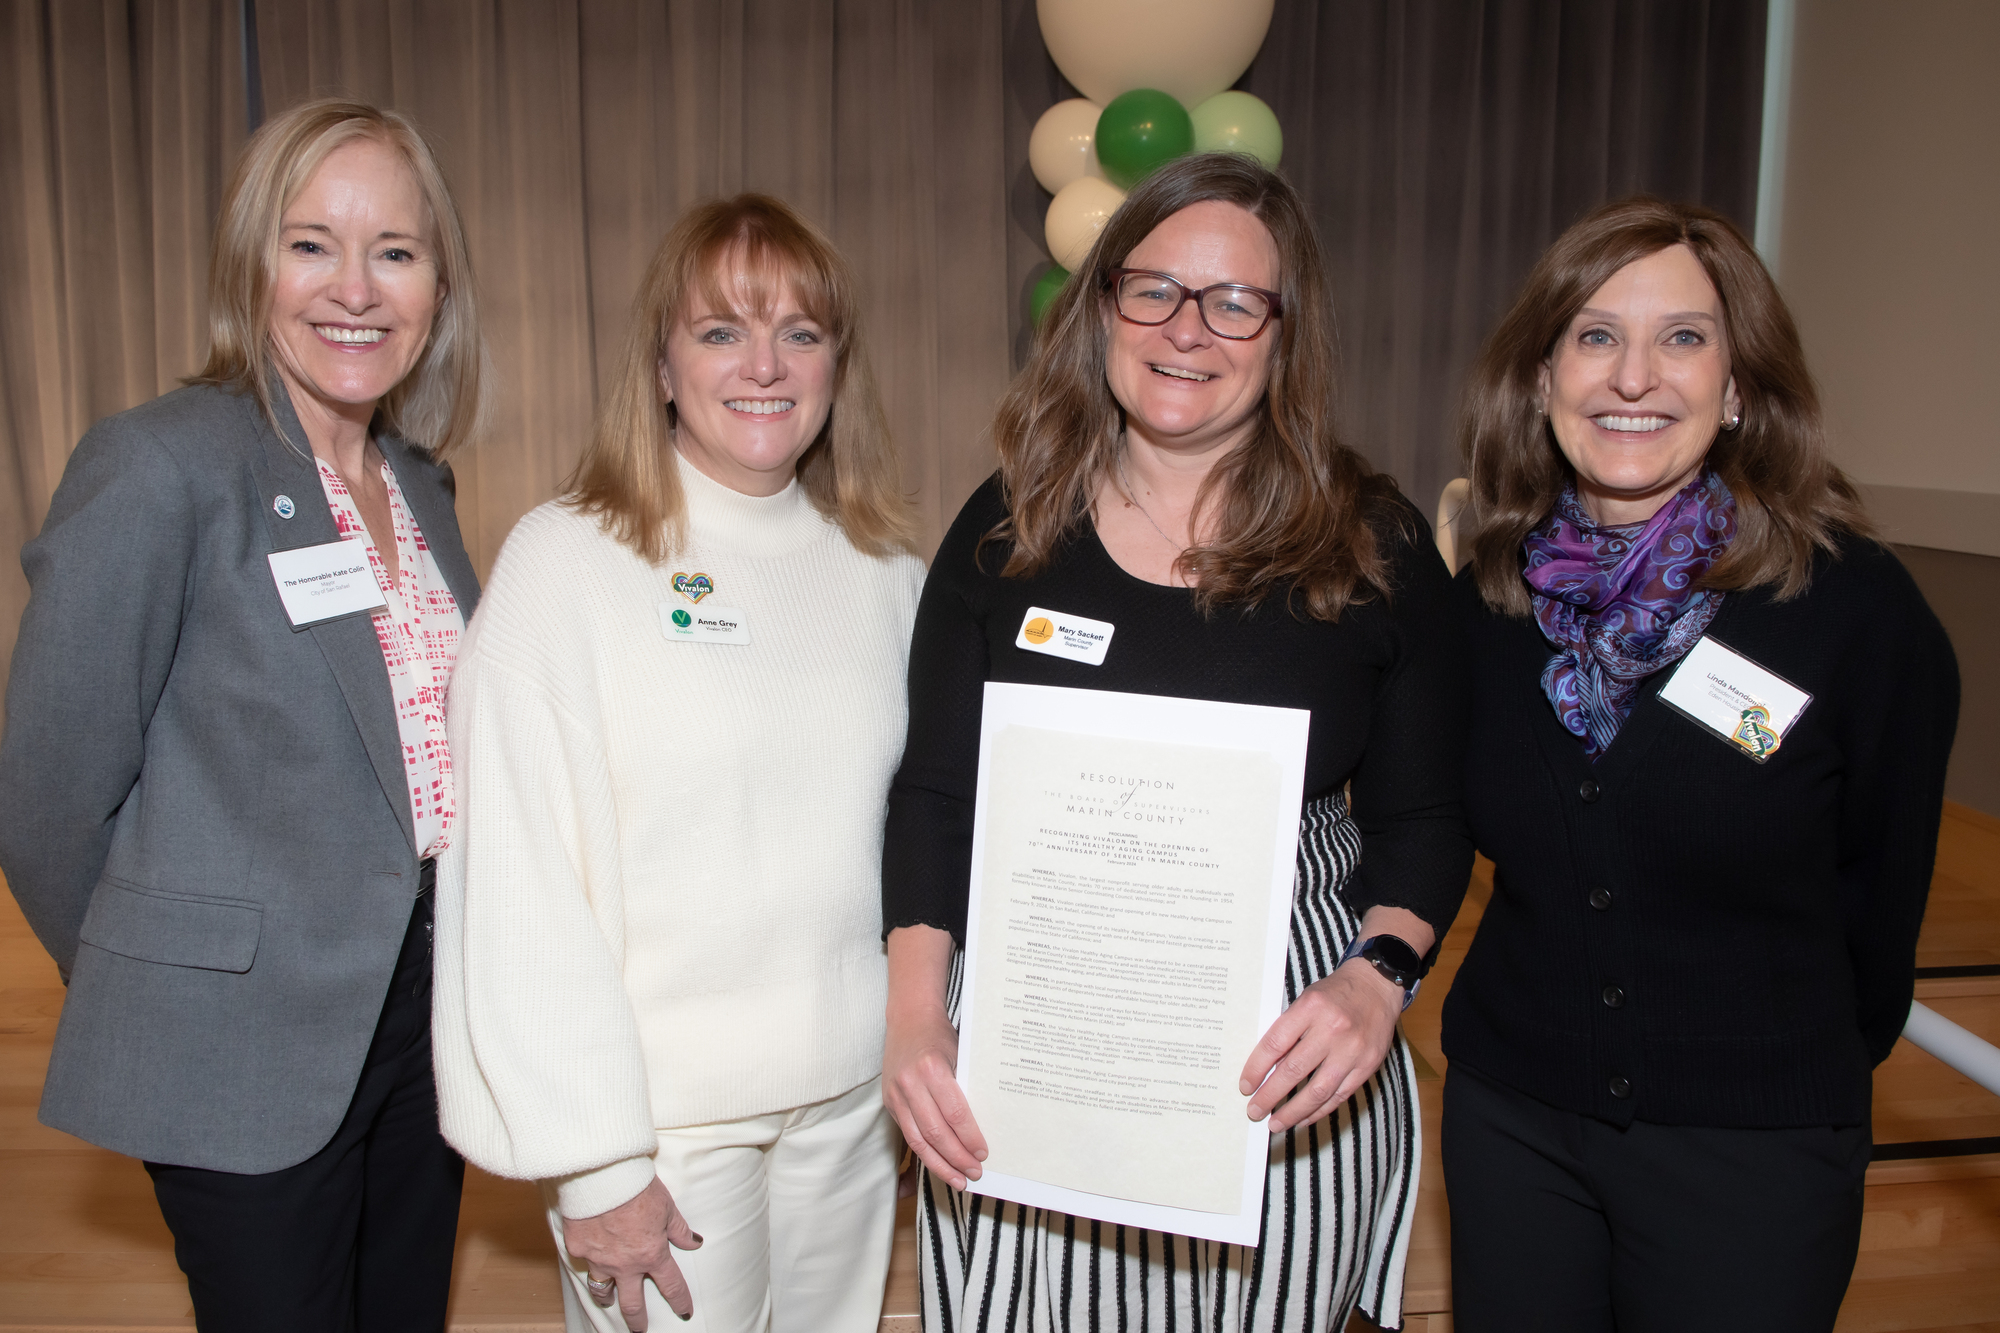 Vivalon CEO Anne Grey, Mayor Kate and Supervisor Sackett smiling to camera with Marin resolution in hand.